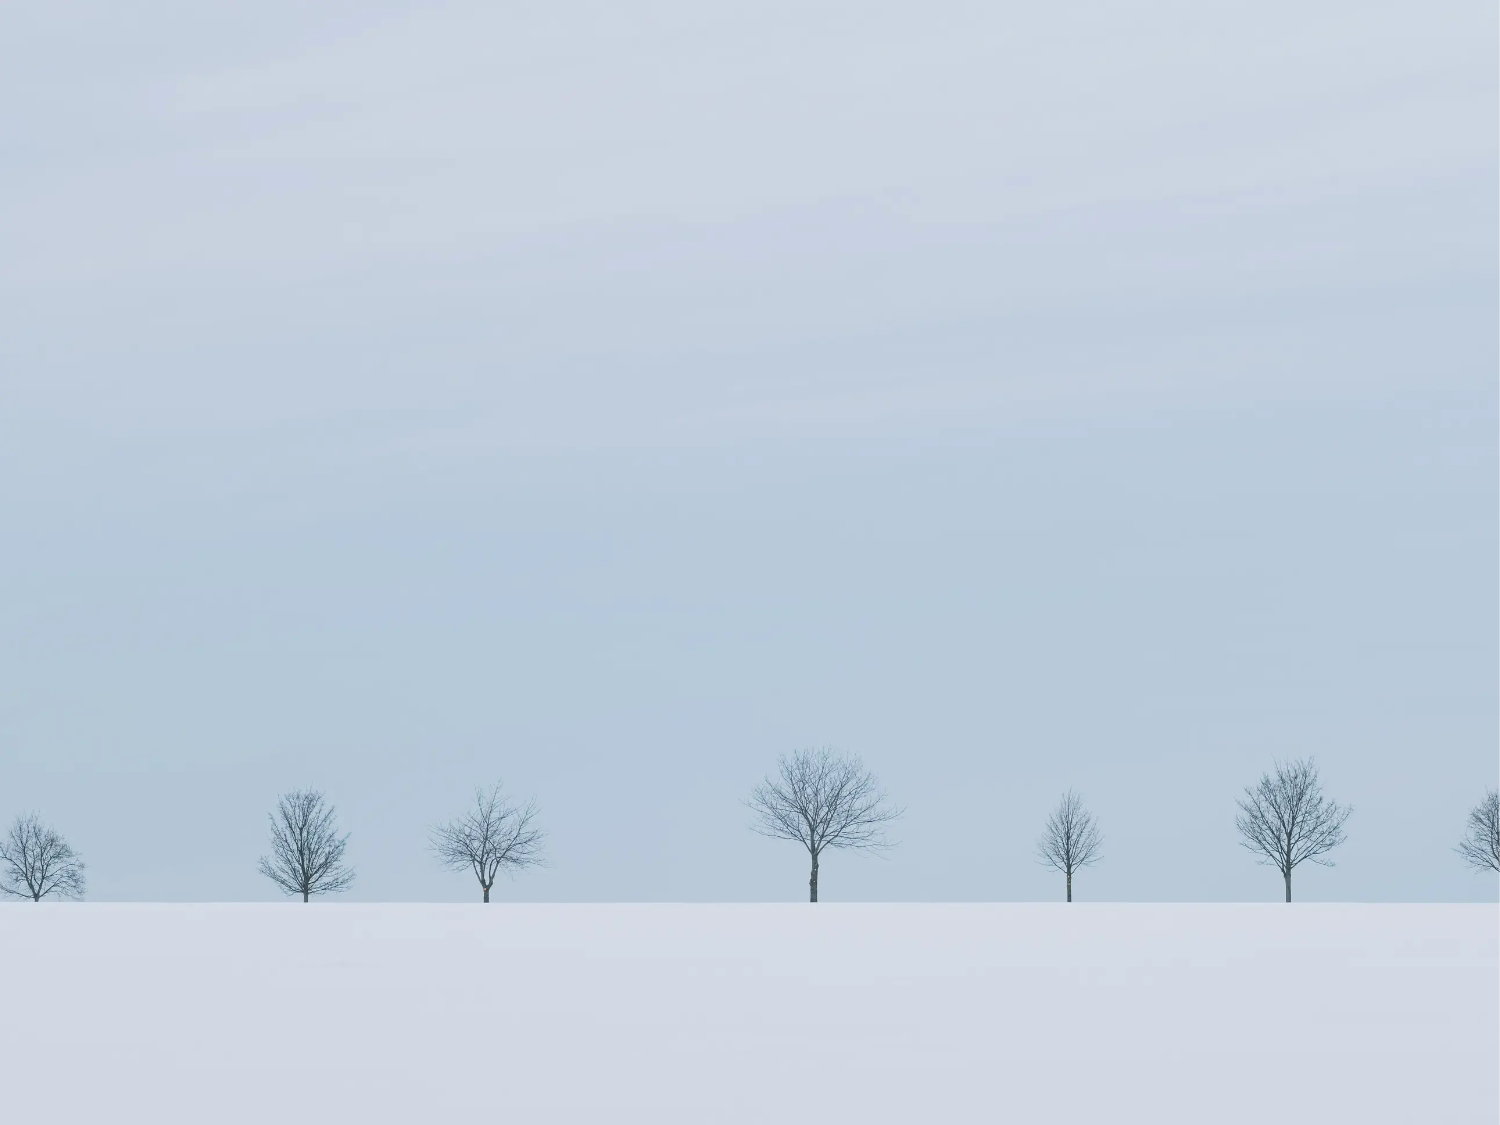 Trees on the horizon of a snowy field